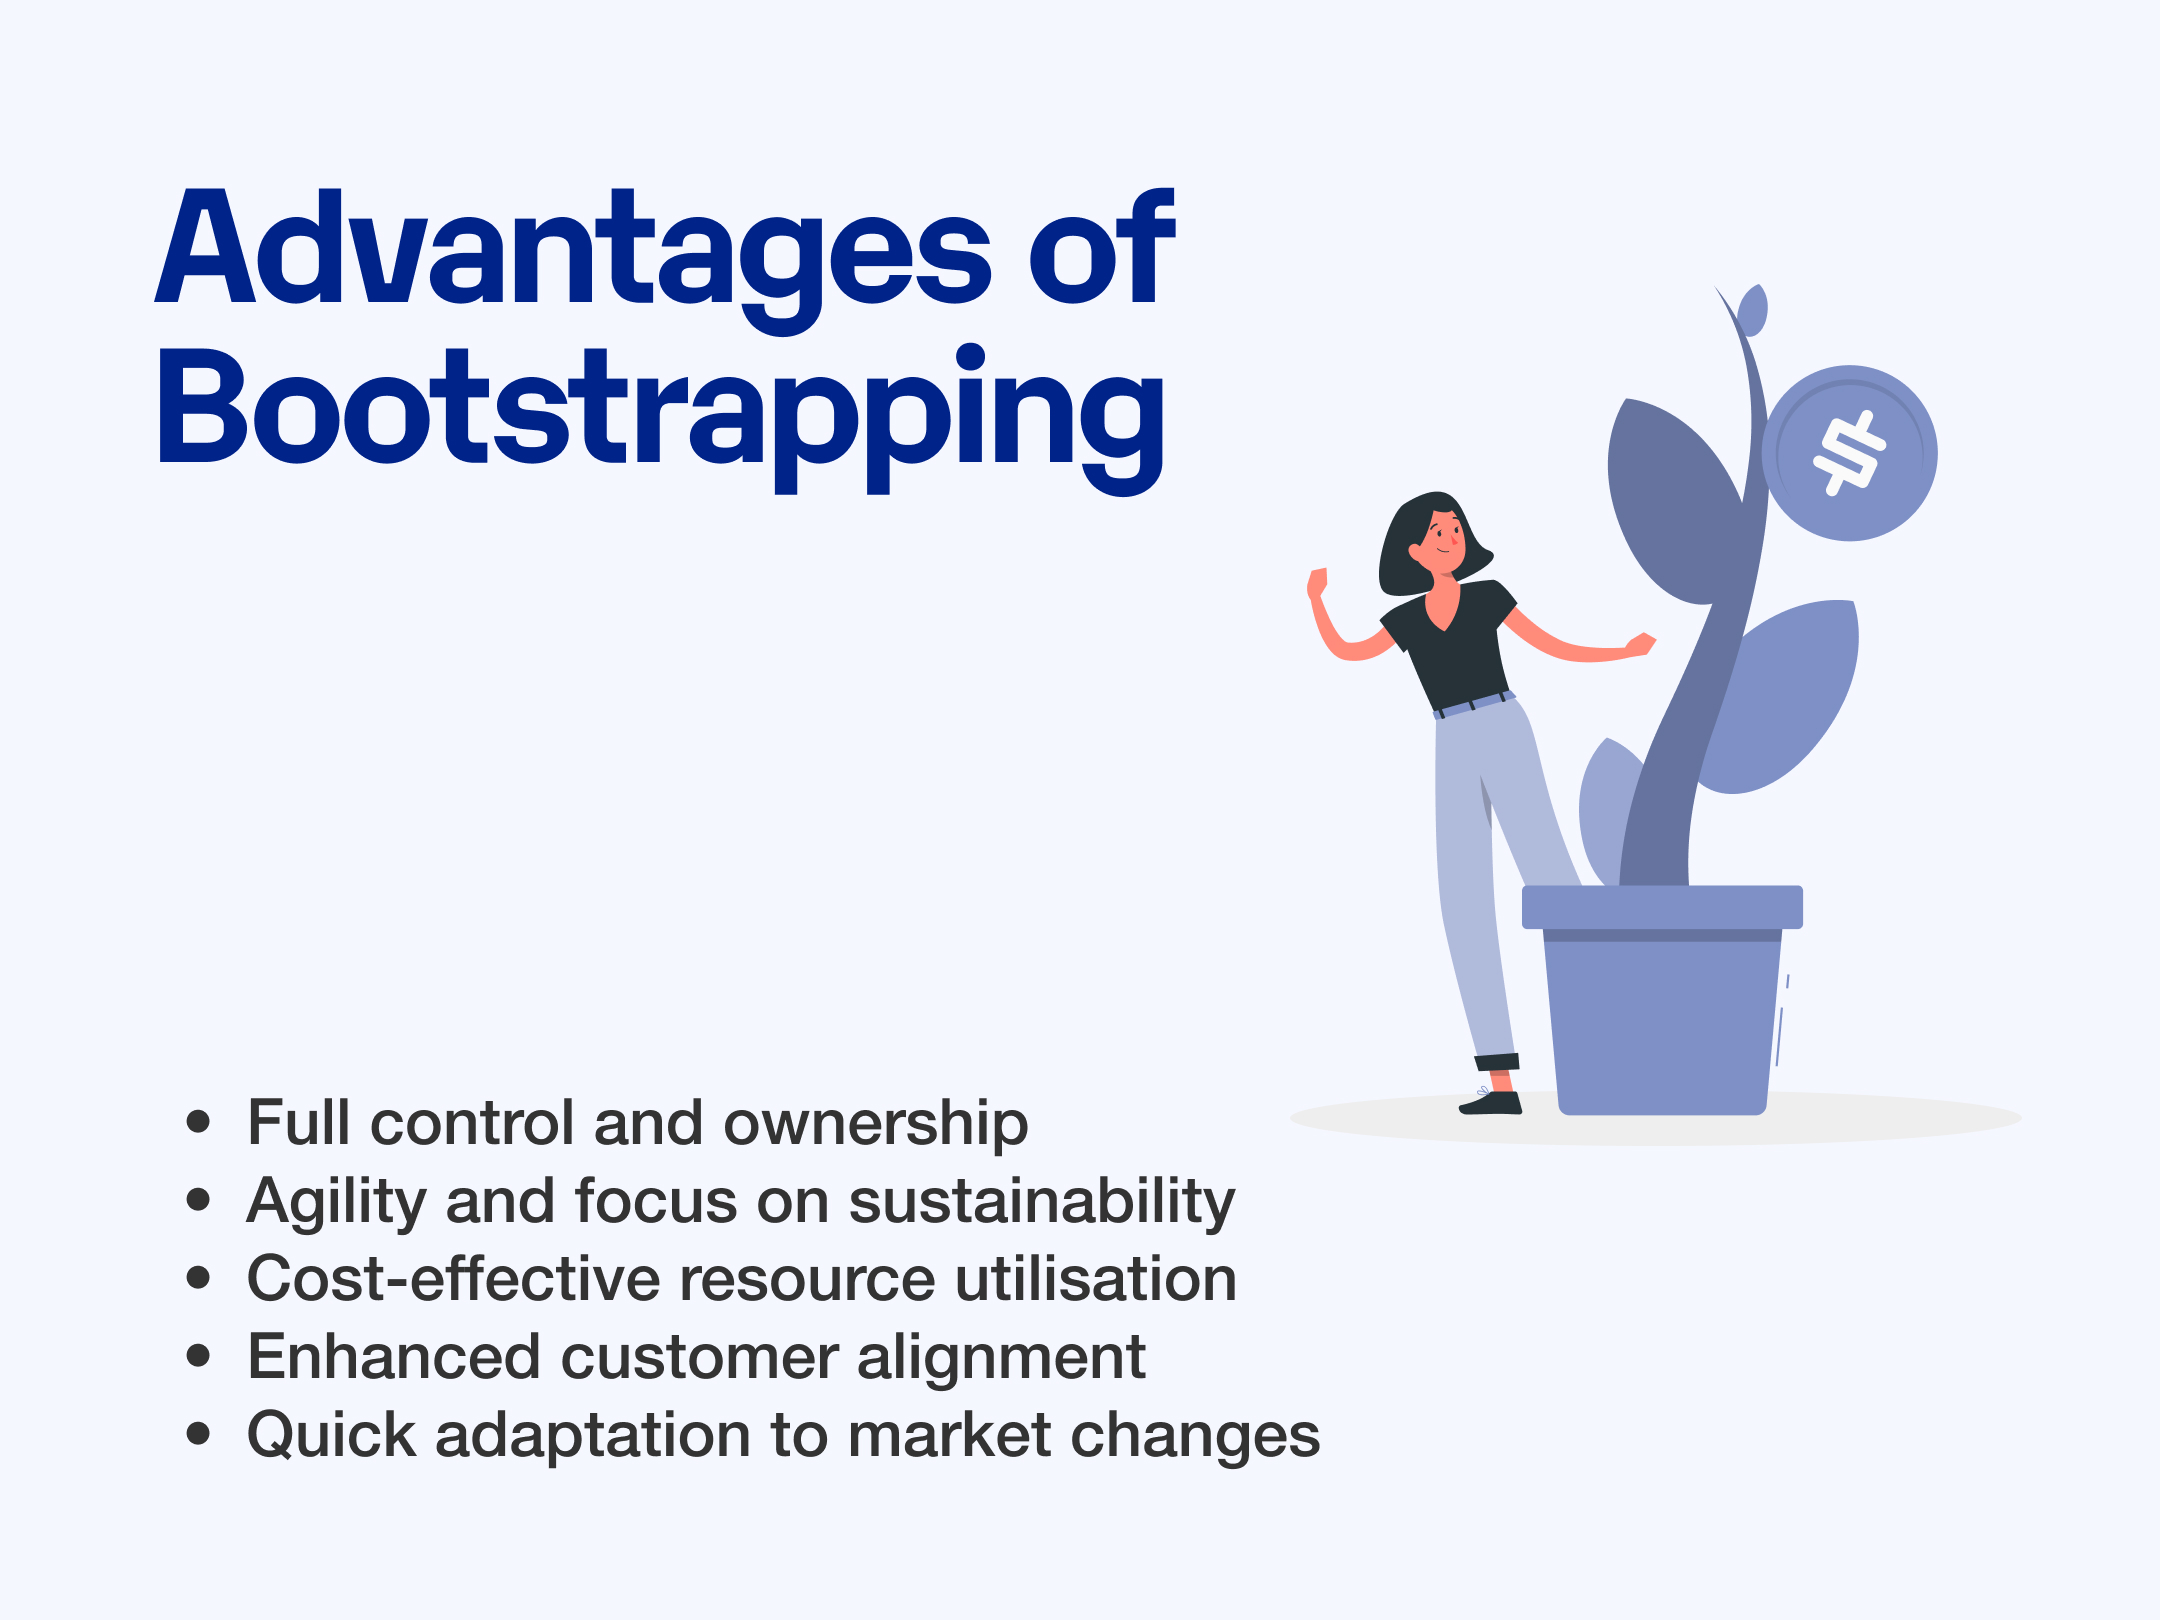 Advantages of bootstrapping a SaaS